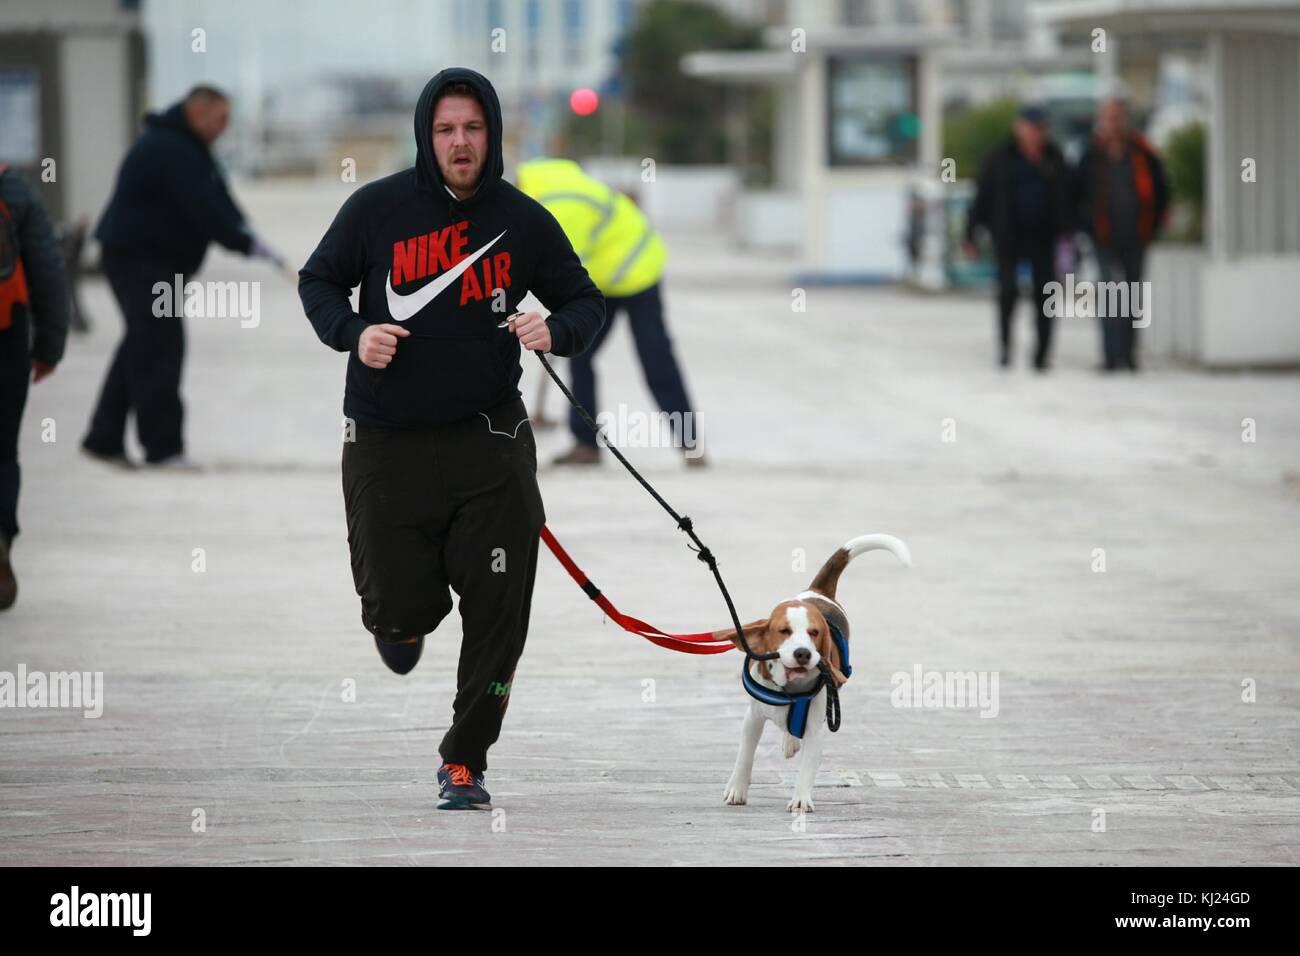 Hastings, East Sussex, UK. 21st November 2017. A man with a hoody jogging along the Hastings promenade seafront with his dog out for exercise. Photo Credit: Paul Lawrenson /Alamy Live News Stock Photo